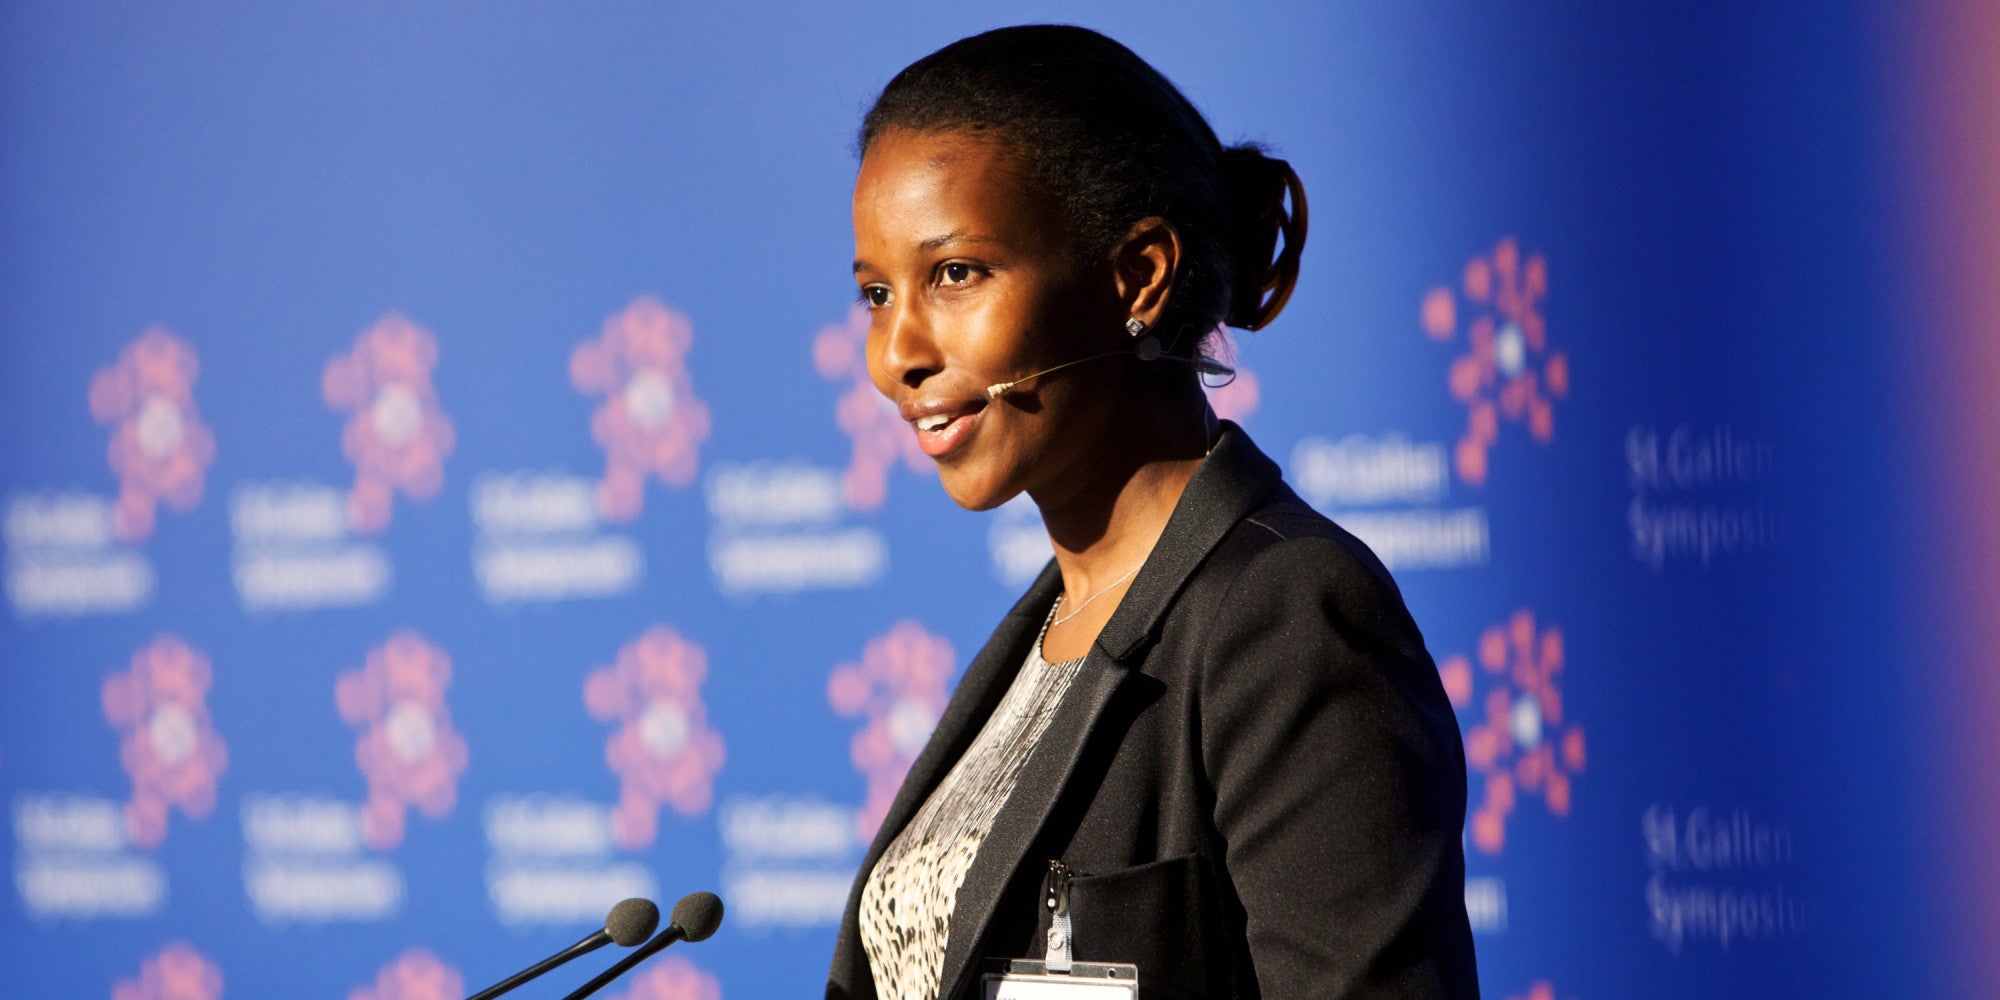 Ayaan Hirsi Ali, founder of AHA Foundation, speaks during the St. Gallen symposium in St. Gallen, Switzerland, on Thursday, May 12, 2011.